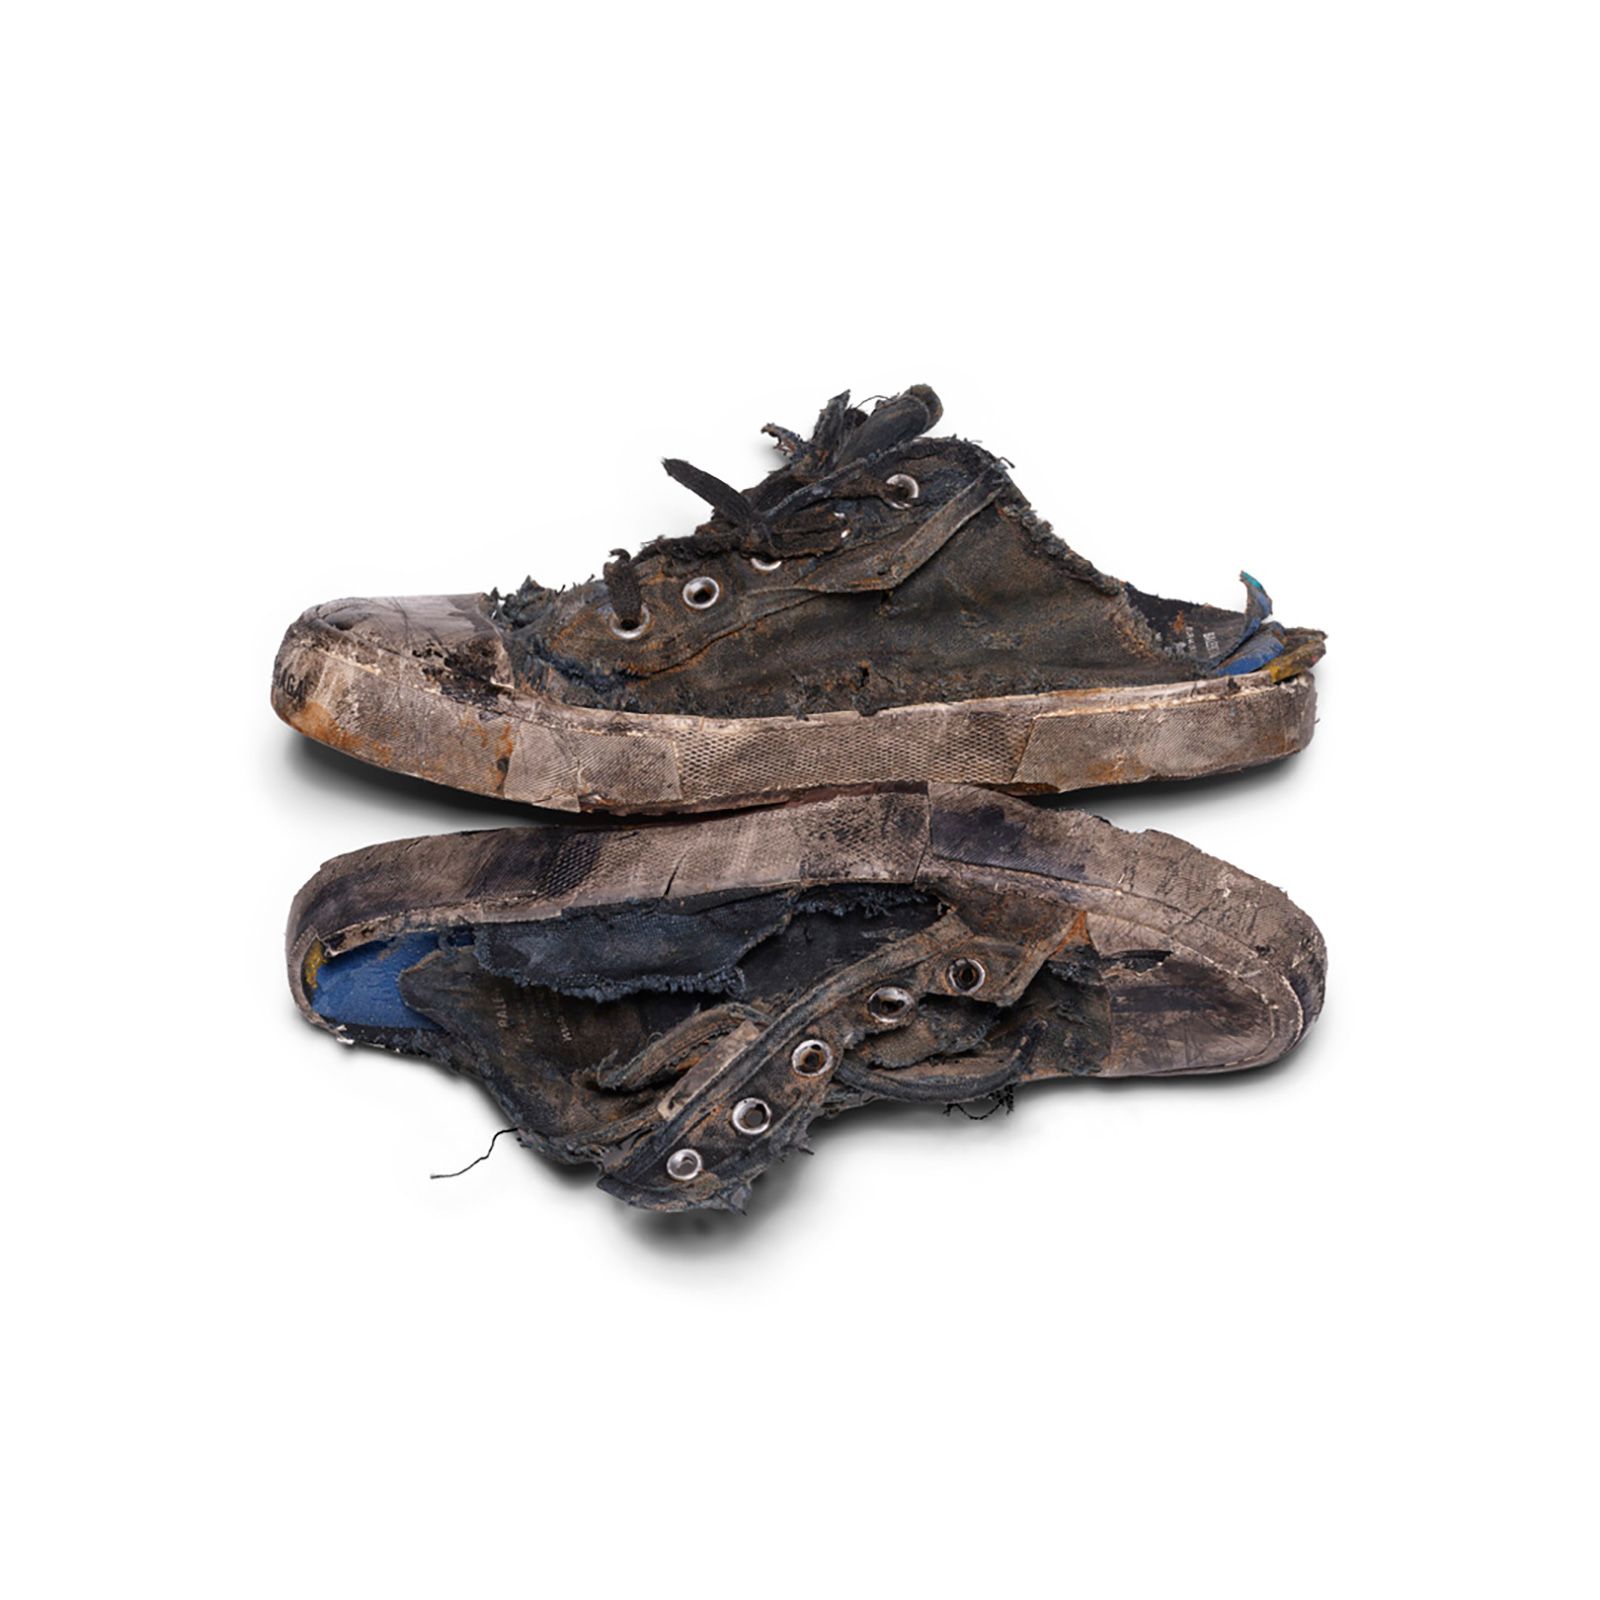 Paying to look homeless: Balenciaga Distressed Sneakers brutally